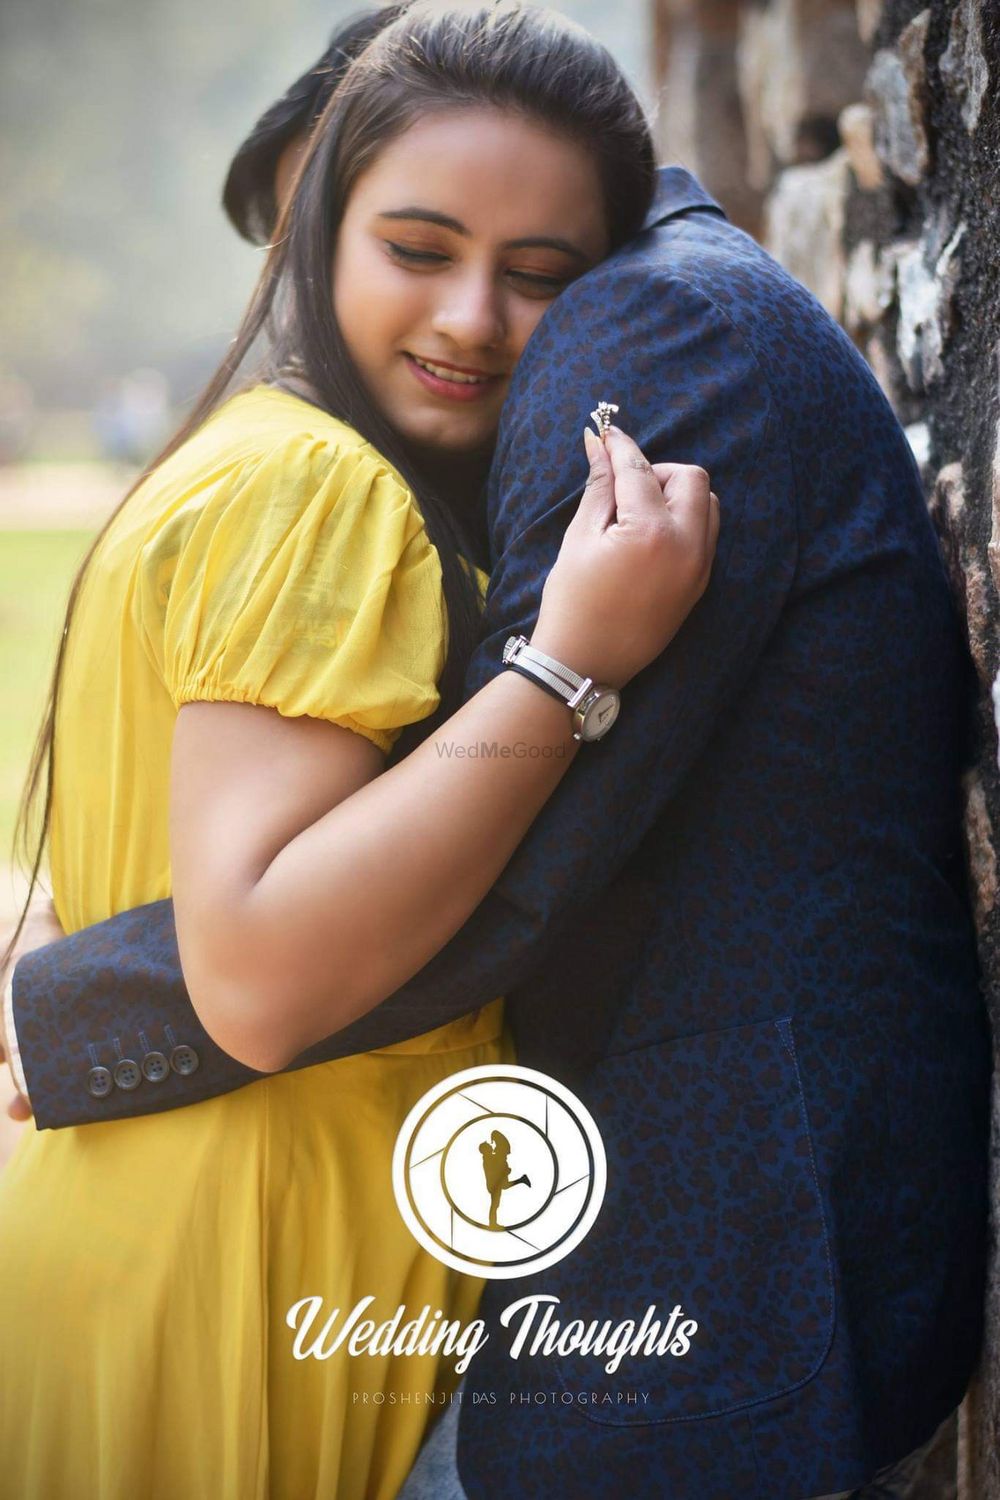 Photo From delhi client pre wedding moments - By Wedding Thoughts Proshenjit Das Photography